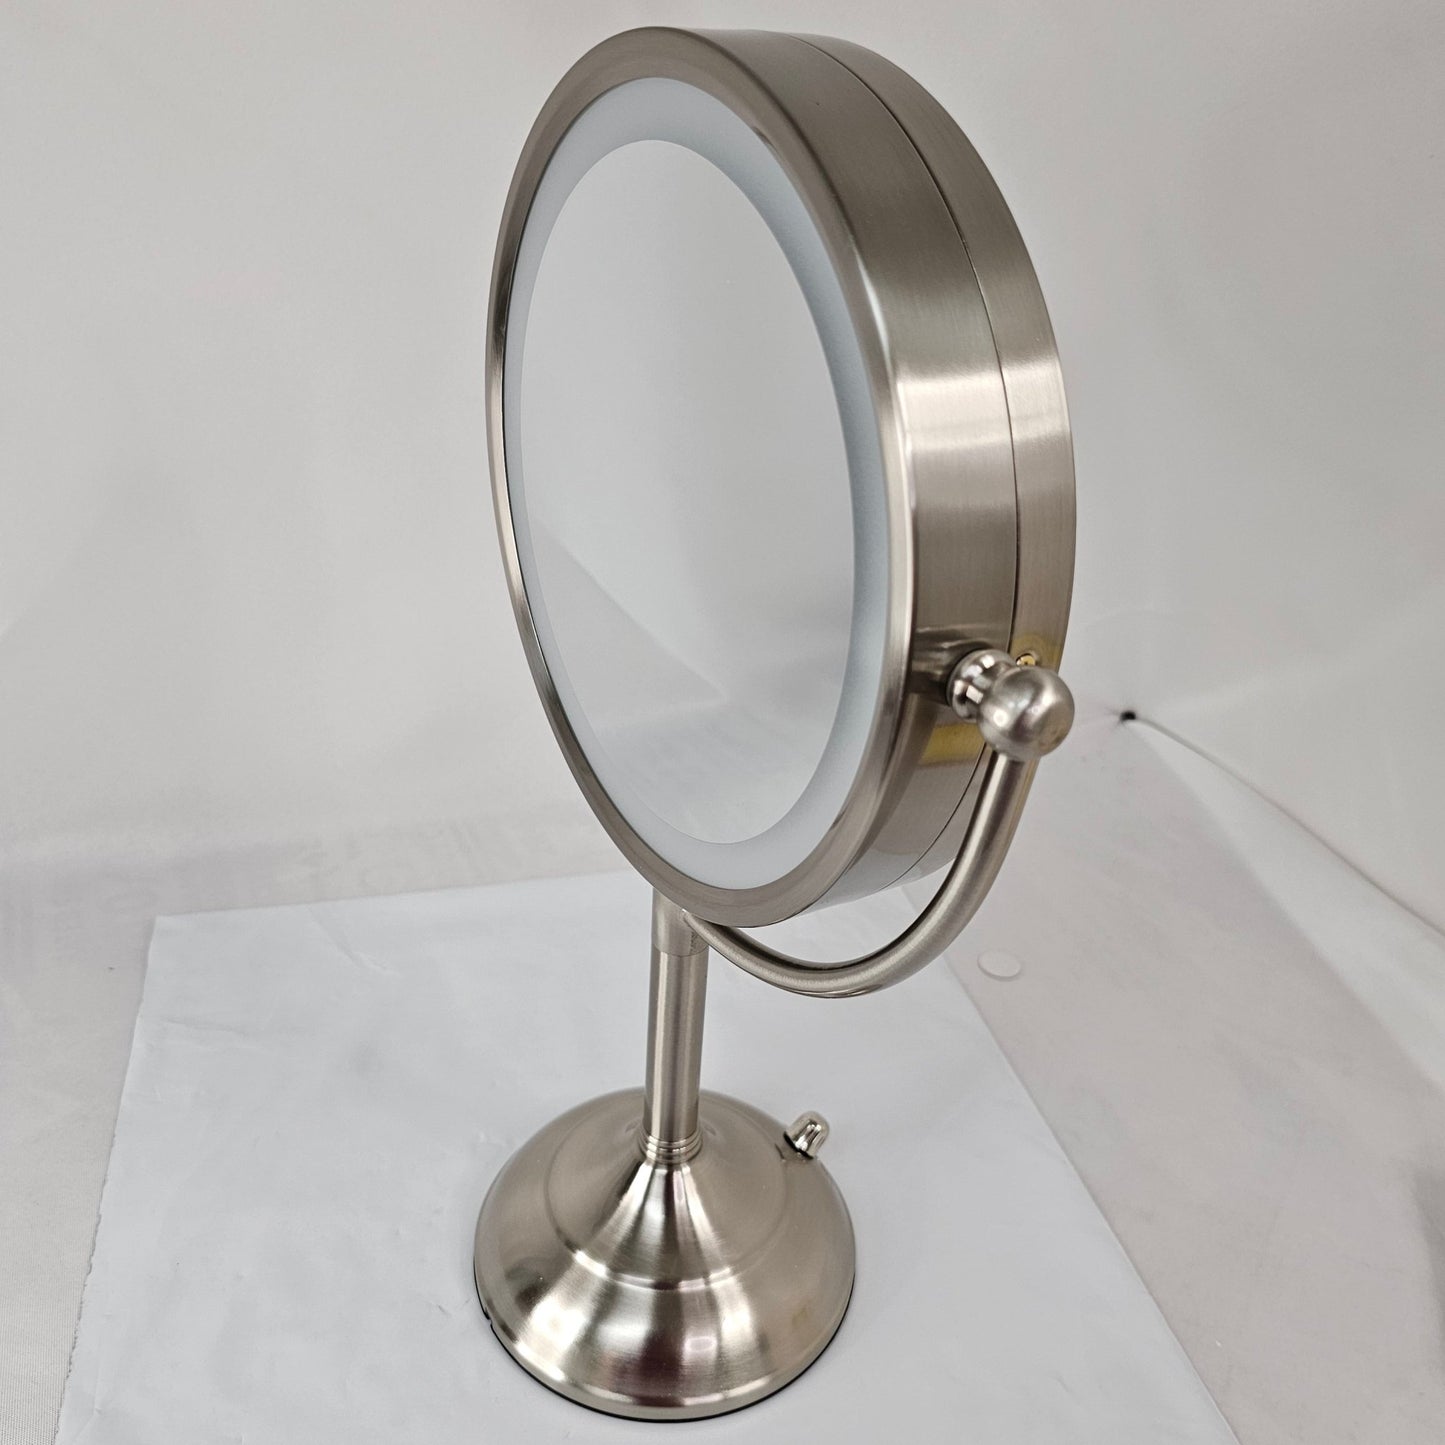 Professional Lighted Make Up Mirror D8511 - DQ Distribution